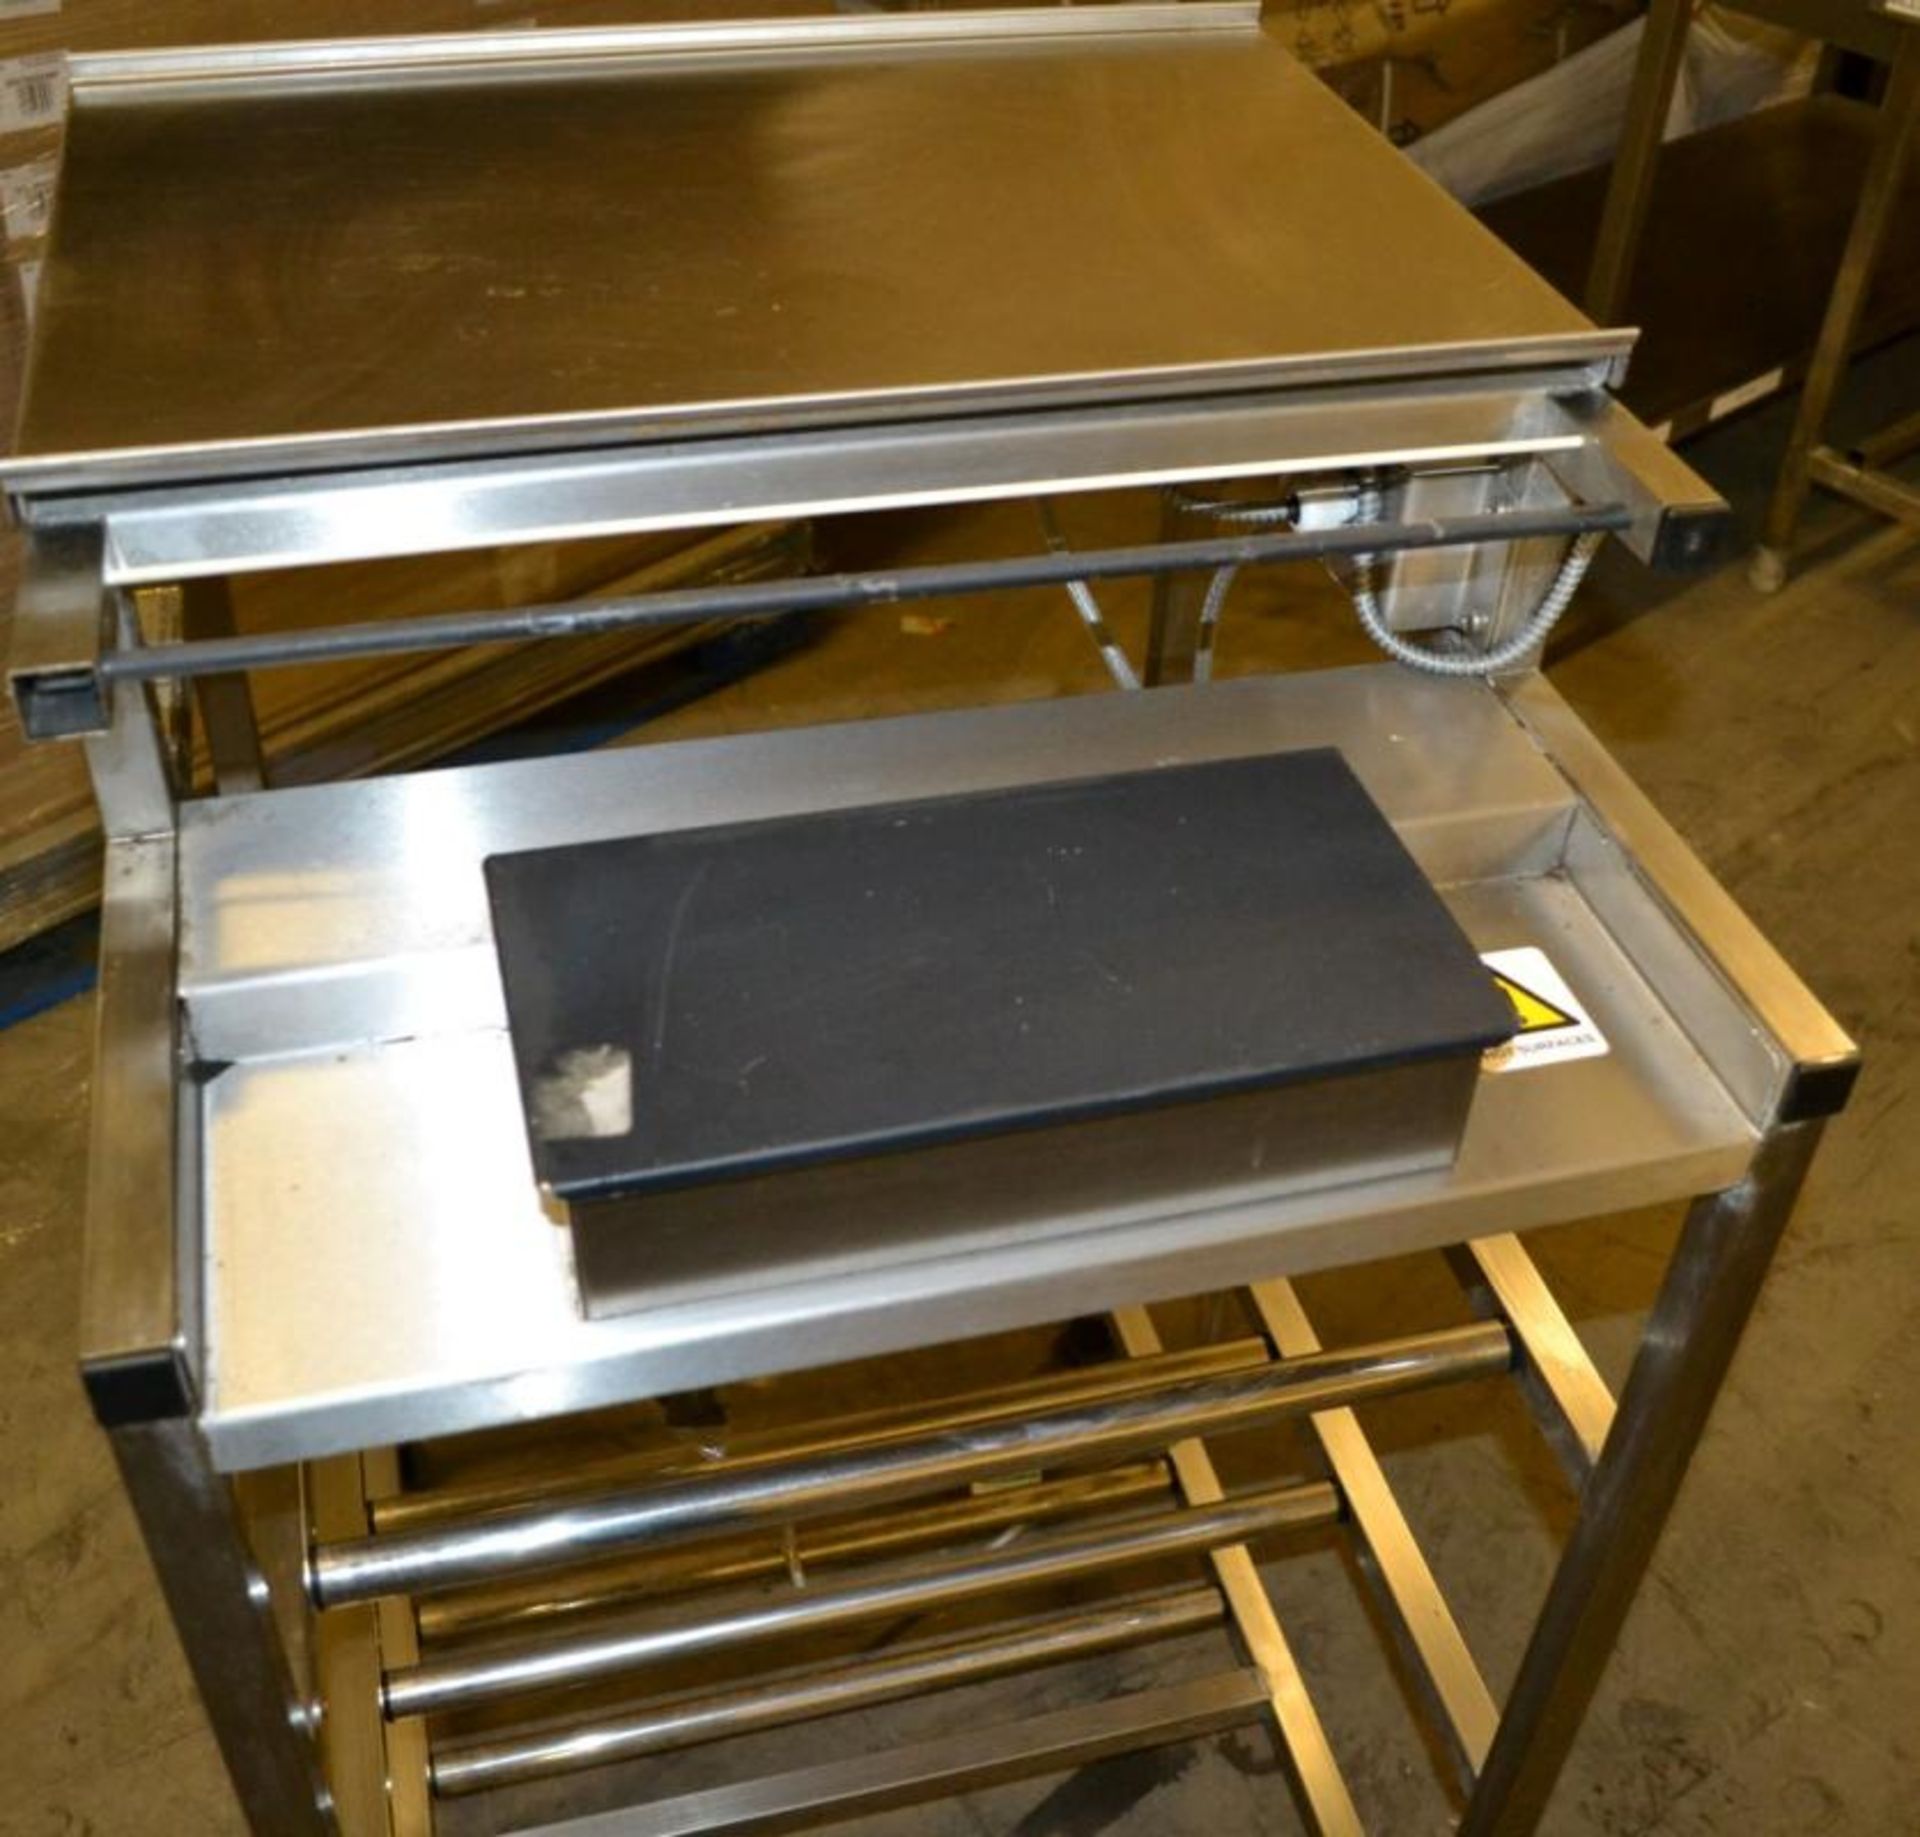 1 x Metalcraft Tray Stretch Wrapping Machine - Dimensions: 56 x 61.5 x 94.5cm - Ref: MC139 - CL282 - - Image 5 of 10